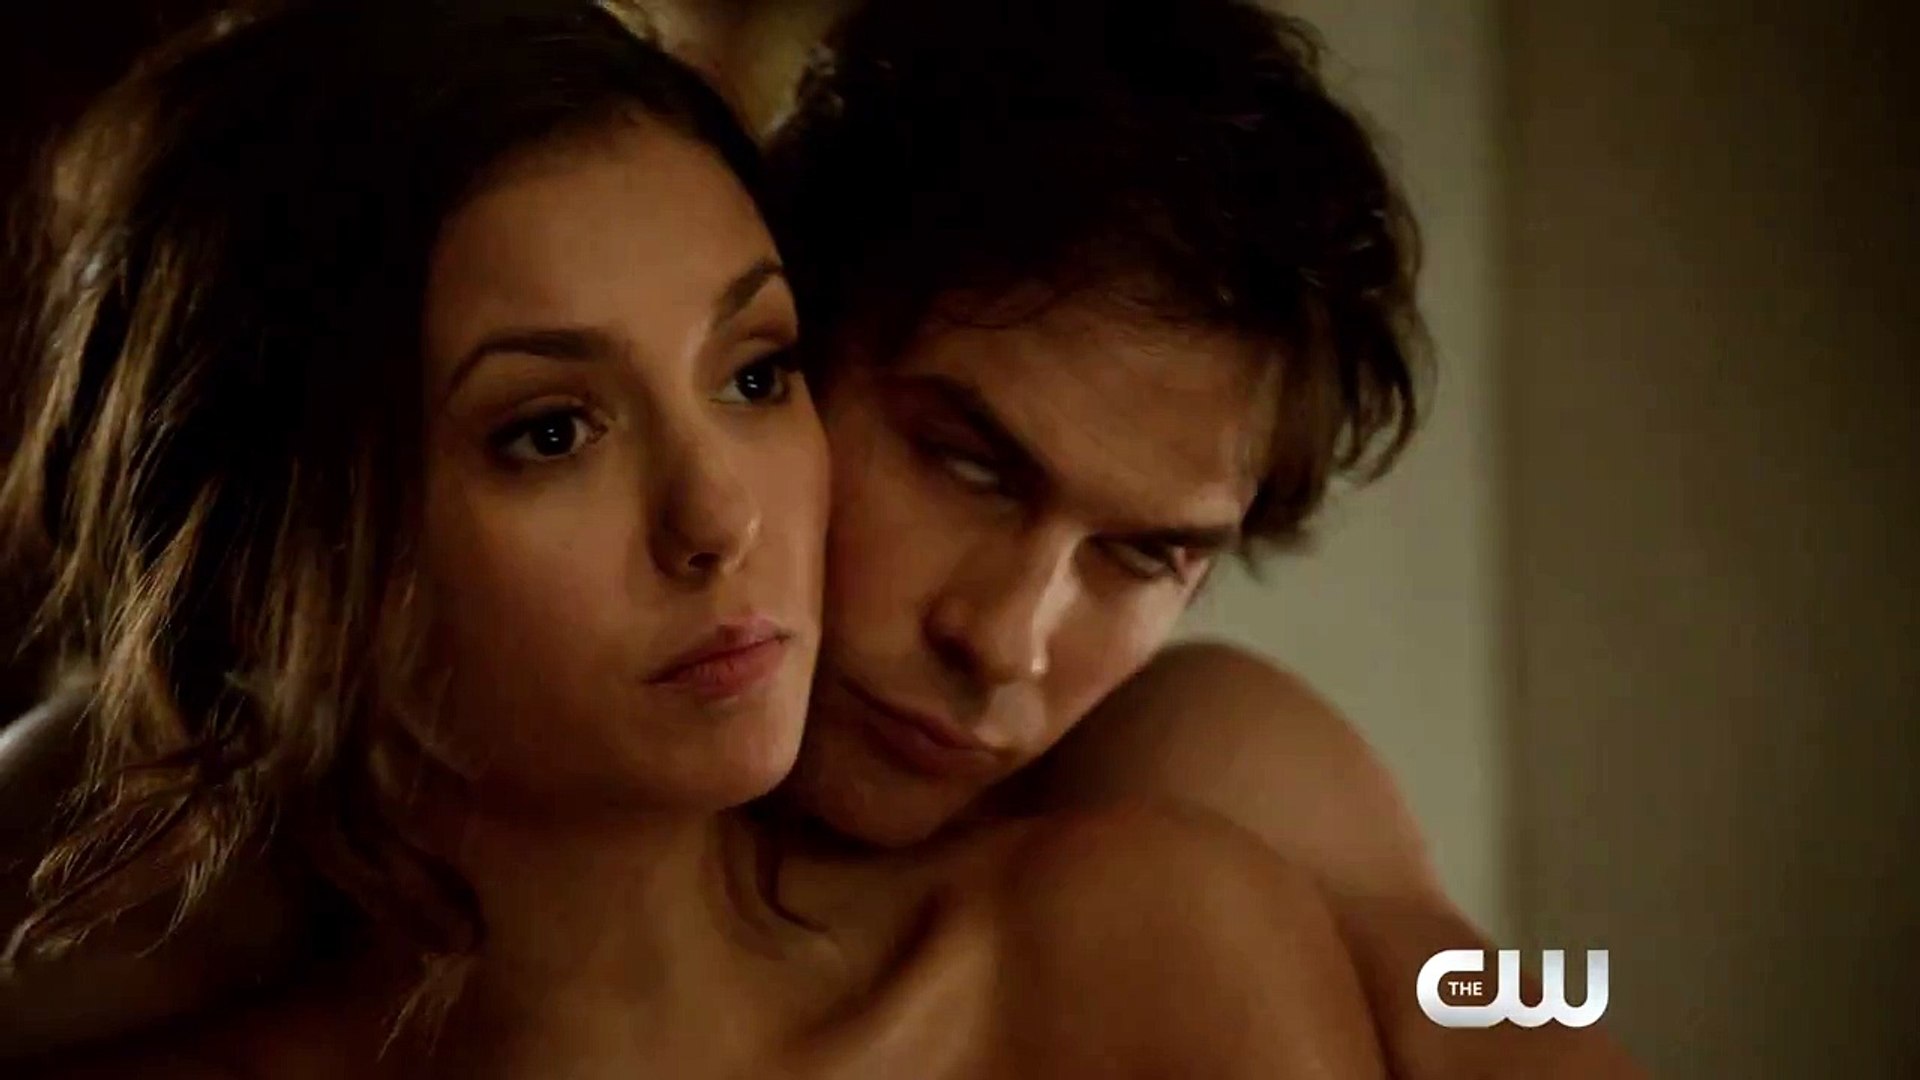 When Do Damon And Elena Get Together In 'The Vampire Diaries?